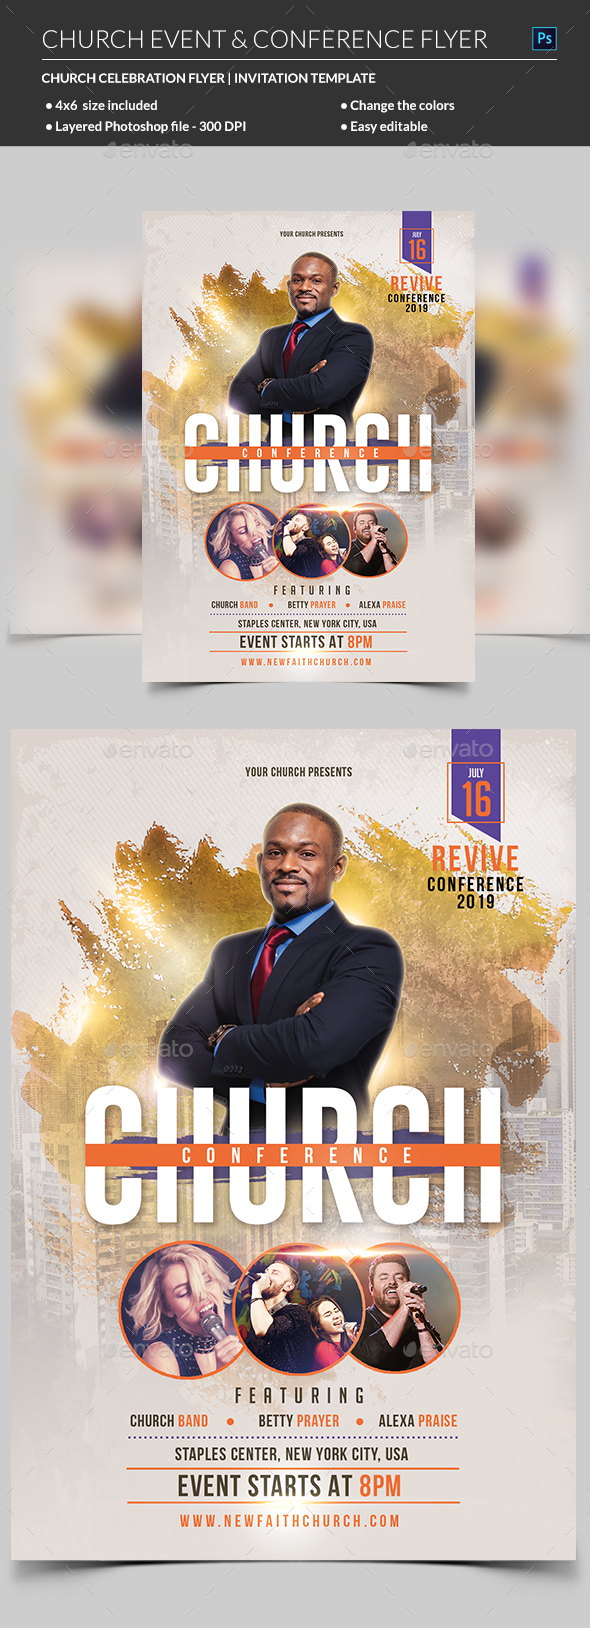 Church Event or Conference Flyer Template